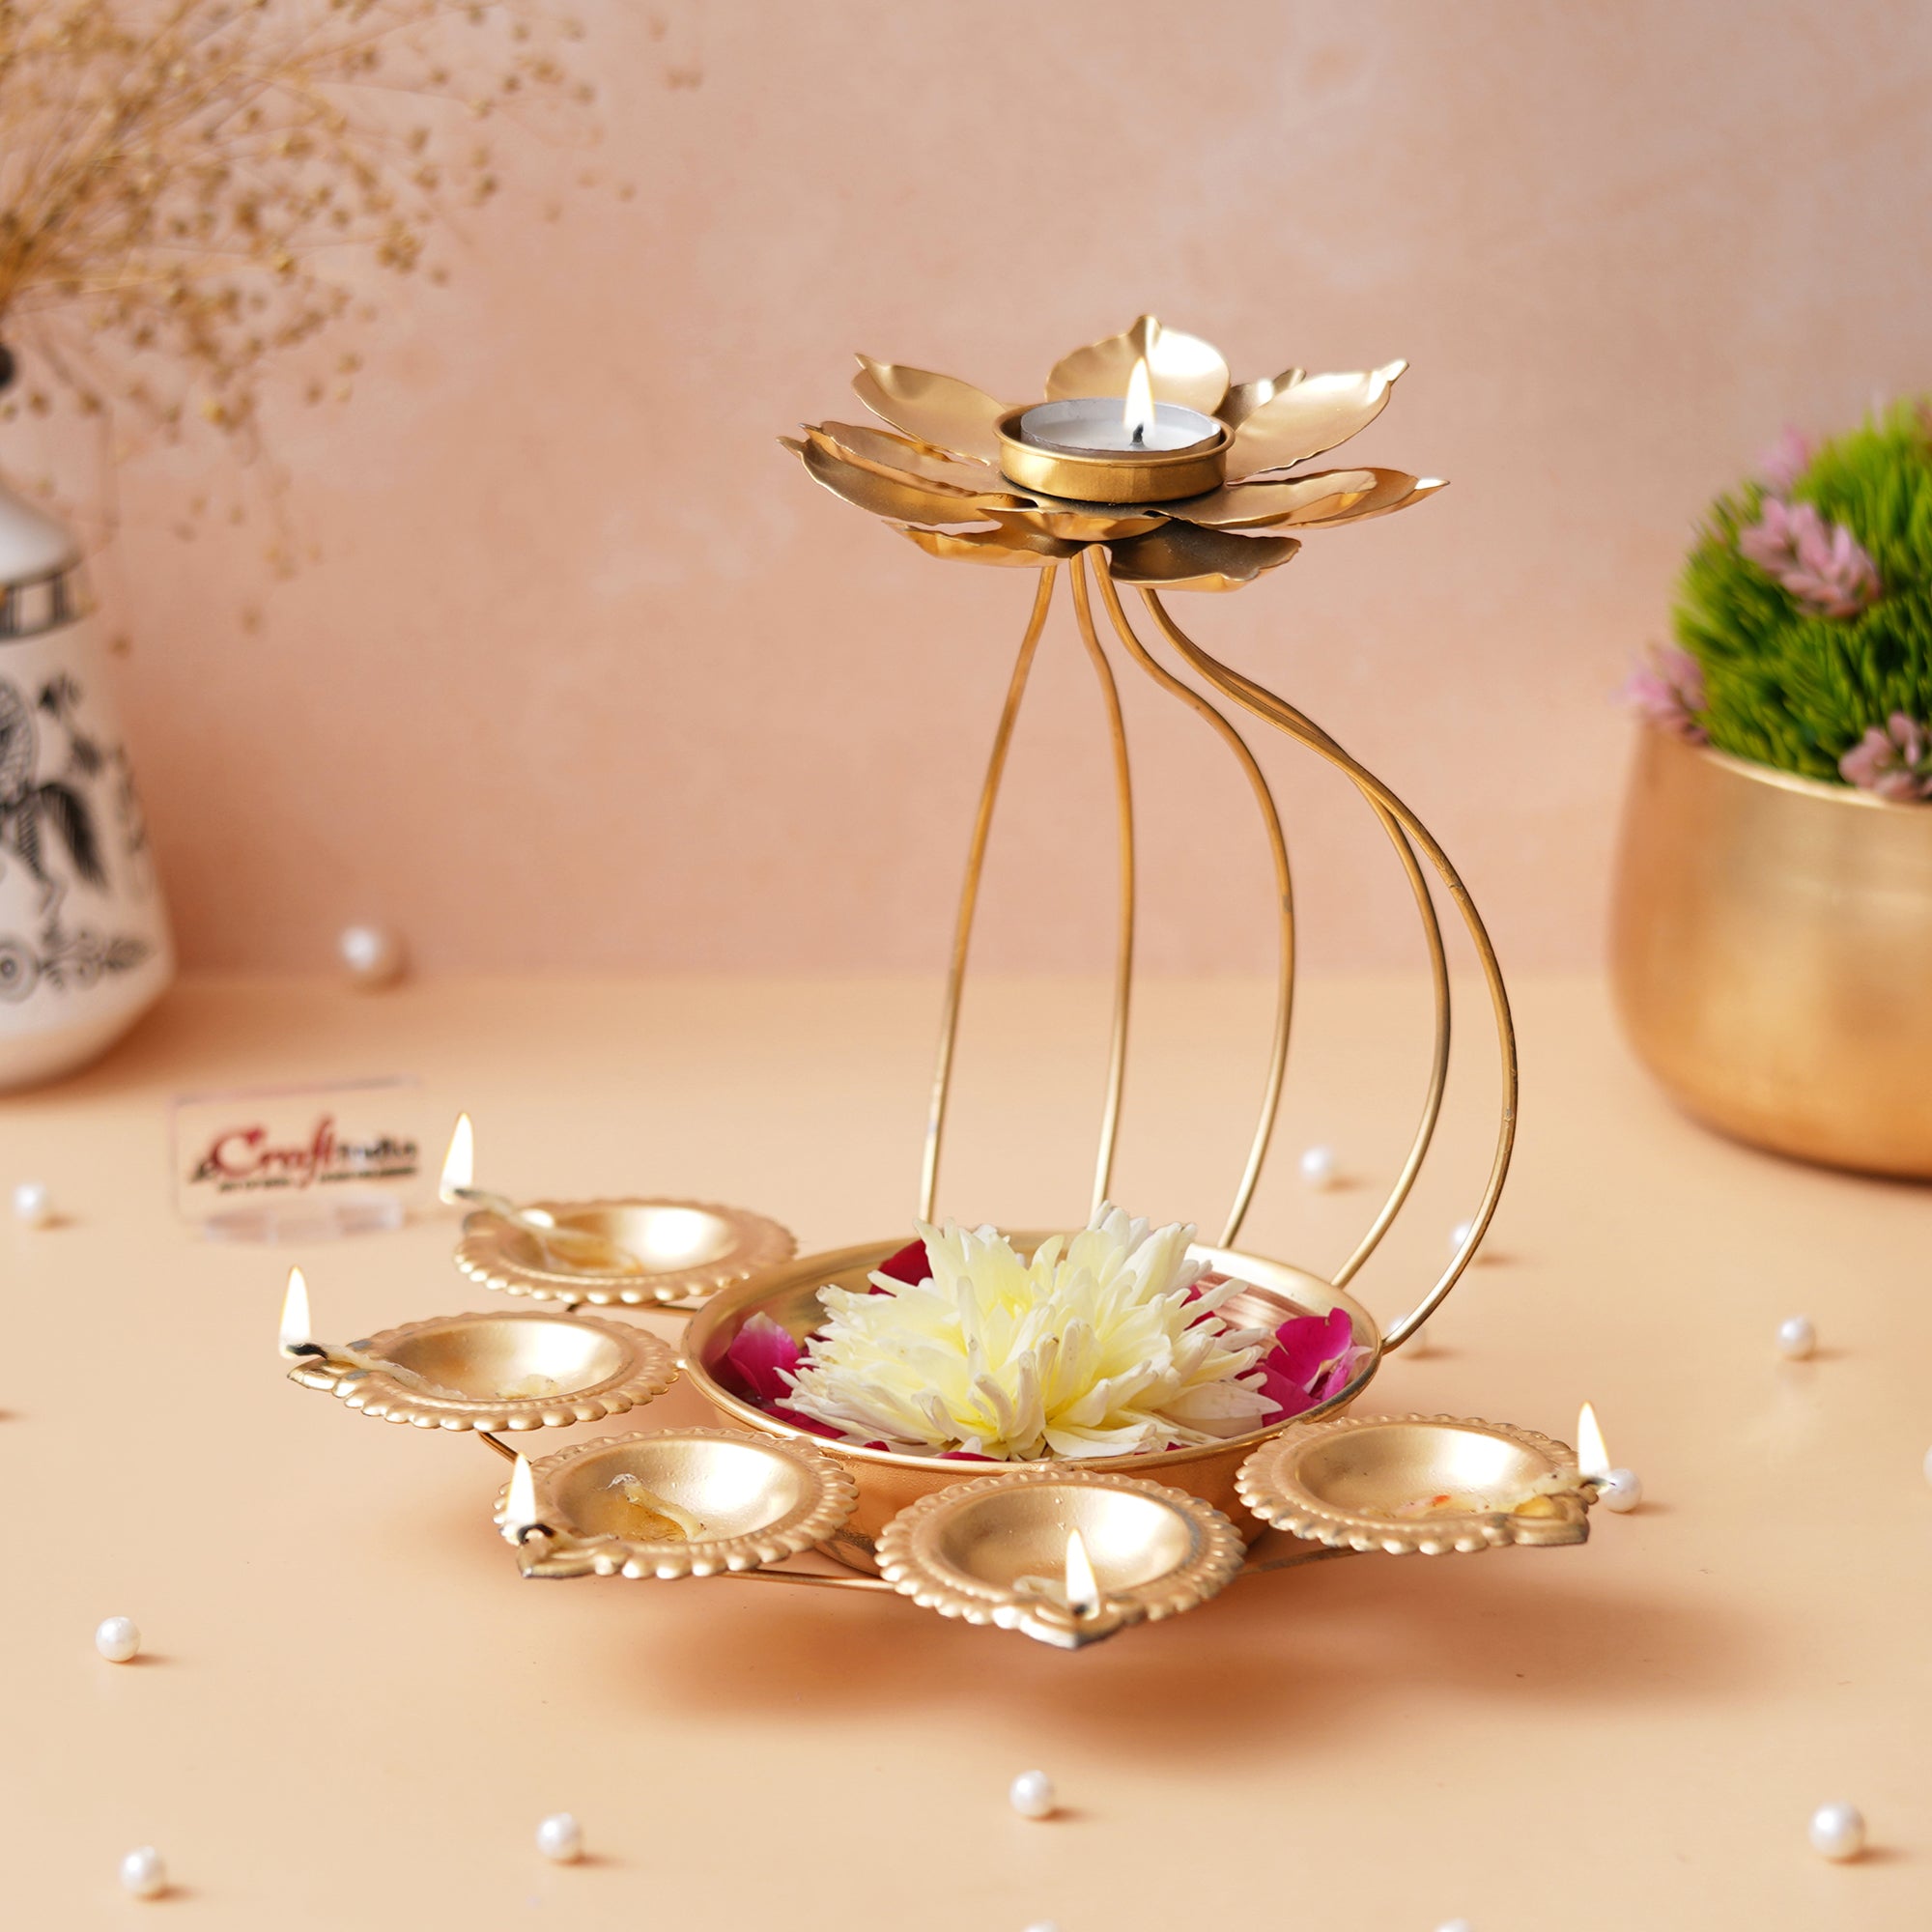 Golden Metal Handcrafted Lotus Shaped Decorative Urli with Tea Light Candle Holder 4